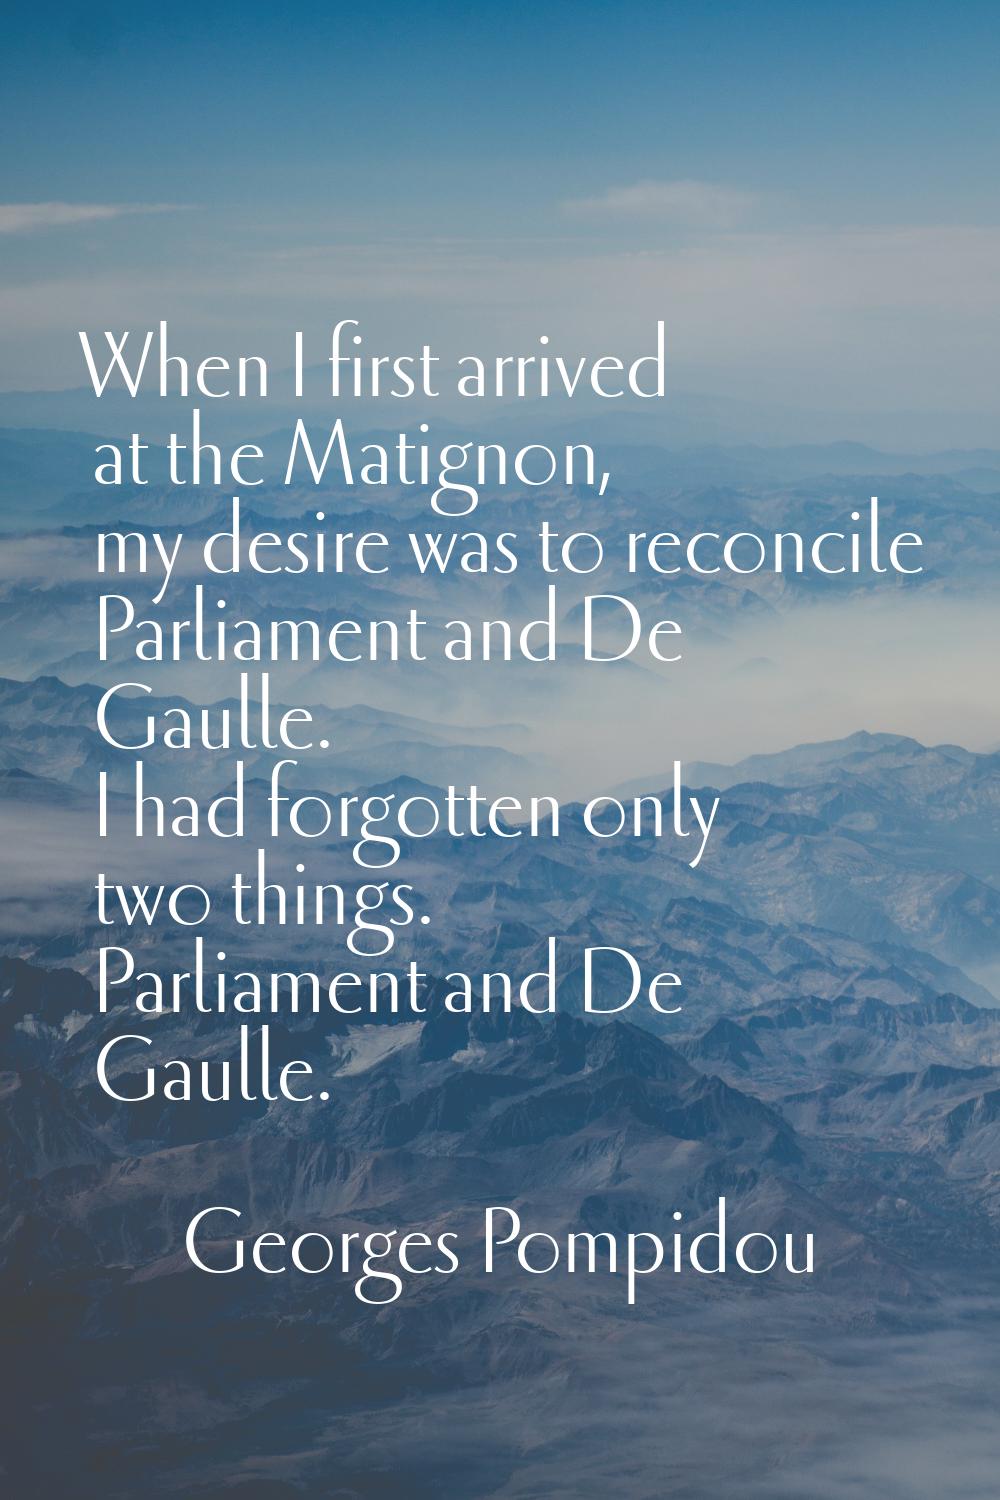 When I first arrived at the Matignon, my desire was to reconcile Parliament and De Gaulle. I had fo